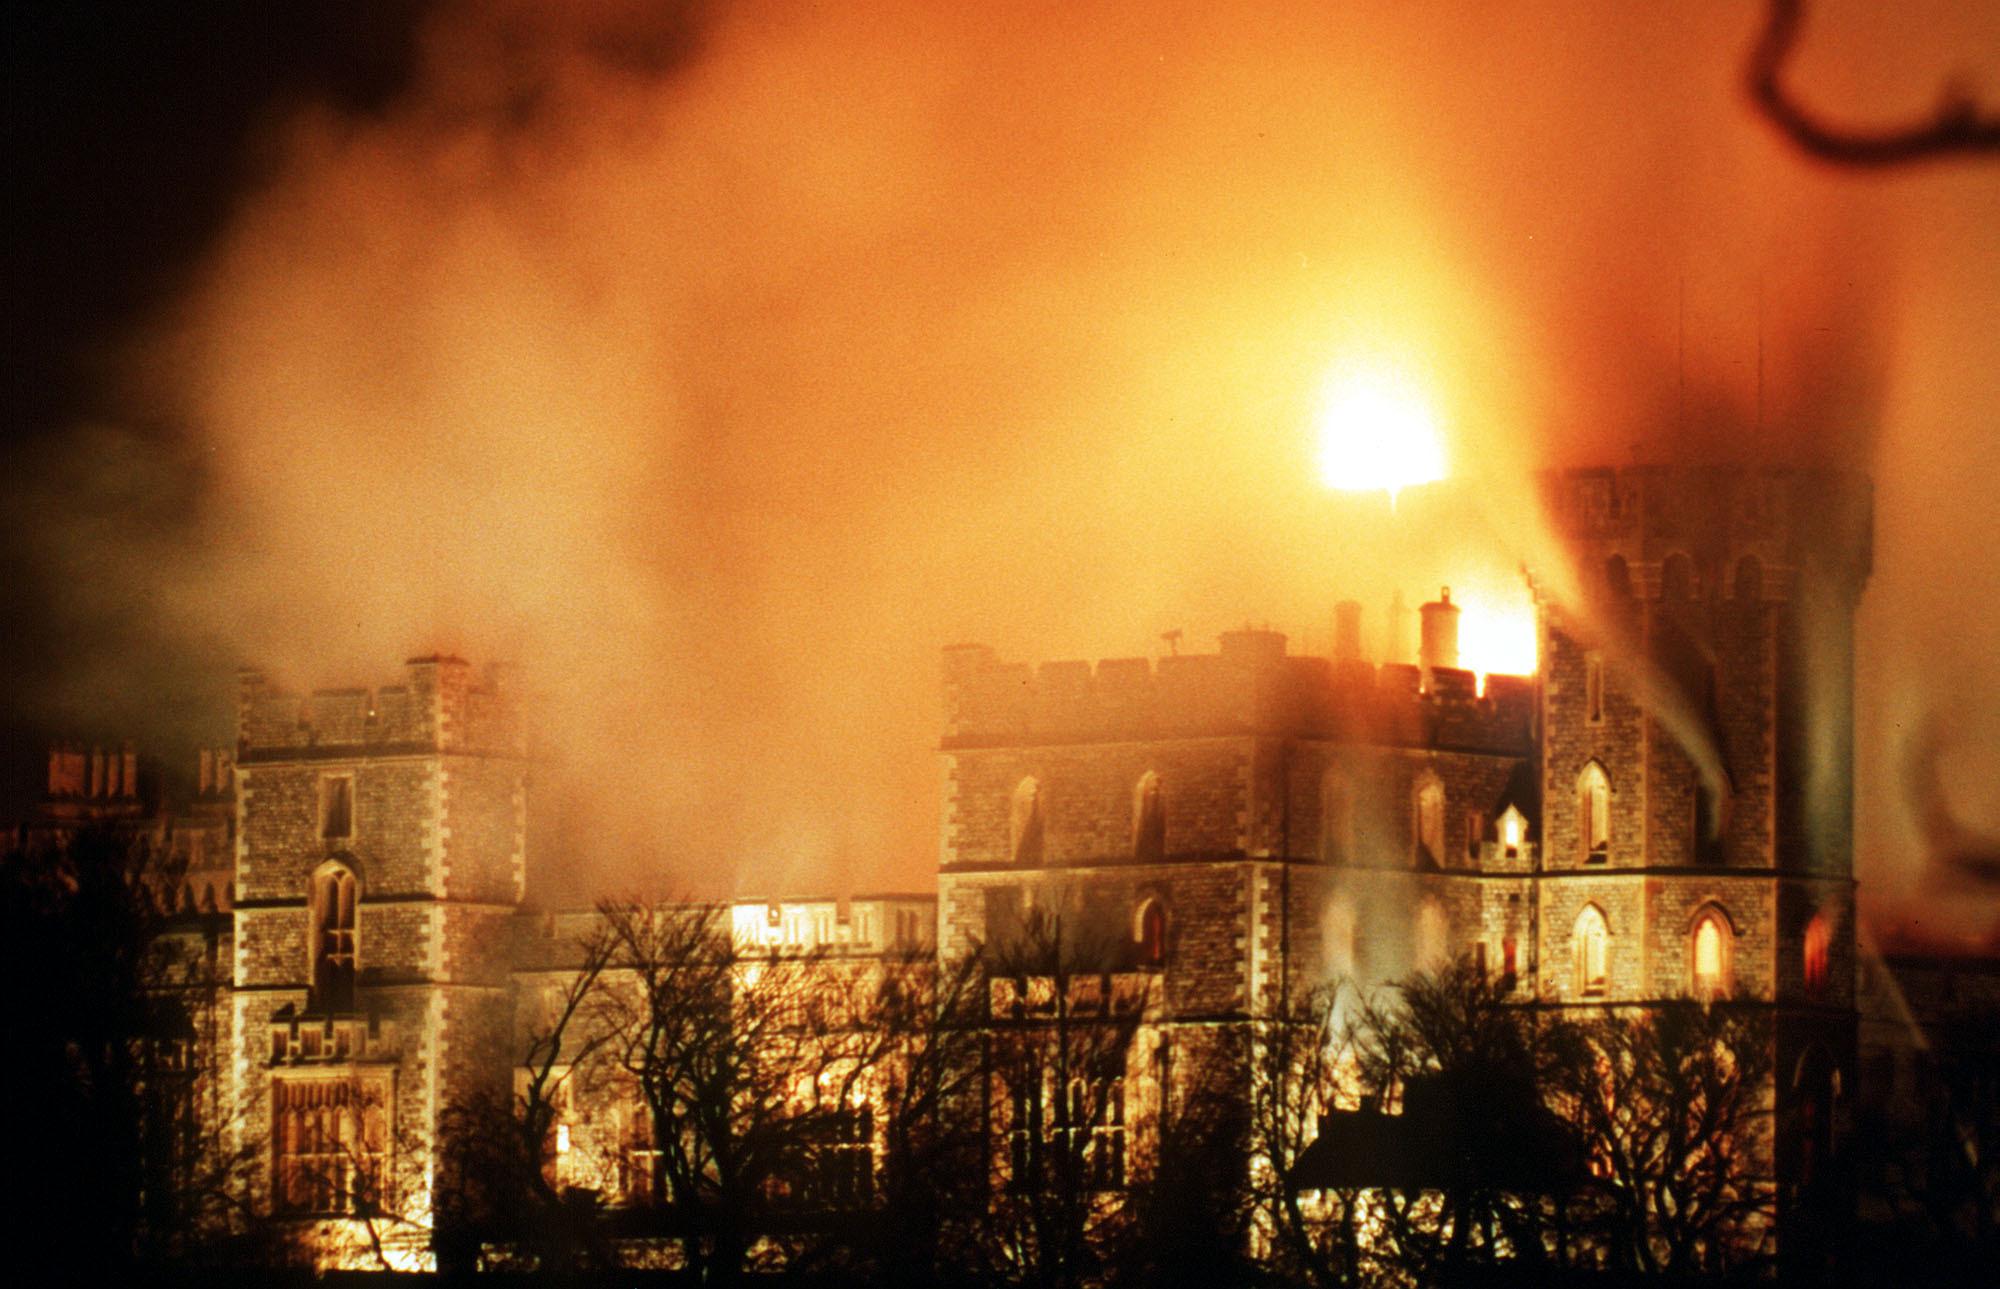 FILE - A view of Windsor Castle after a major fire, causing millions of pounds of damage, in Windsor, England. Nov. 20, 1992.Queen Elizabeth II, Britain’s longest-reigning monarch and a rock of stability across much of a turbulent century, has died. She was 96. Buckingham Palace made the announcement in a statement on Thursday Sept. 8, 2022. (AP Photo/Denis Paquin, File)